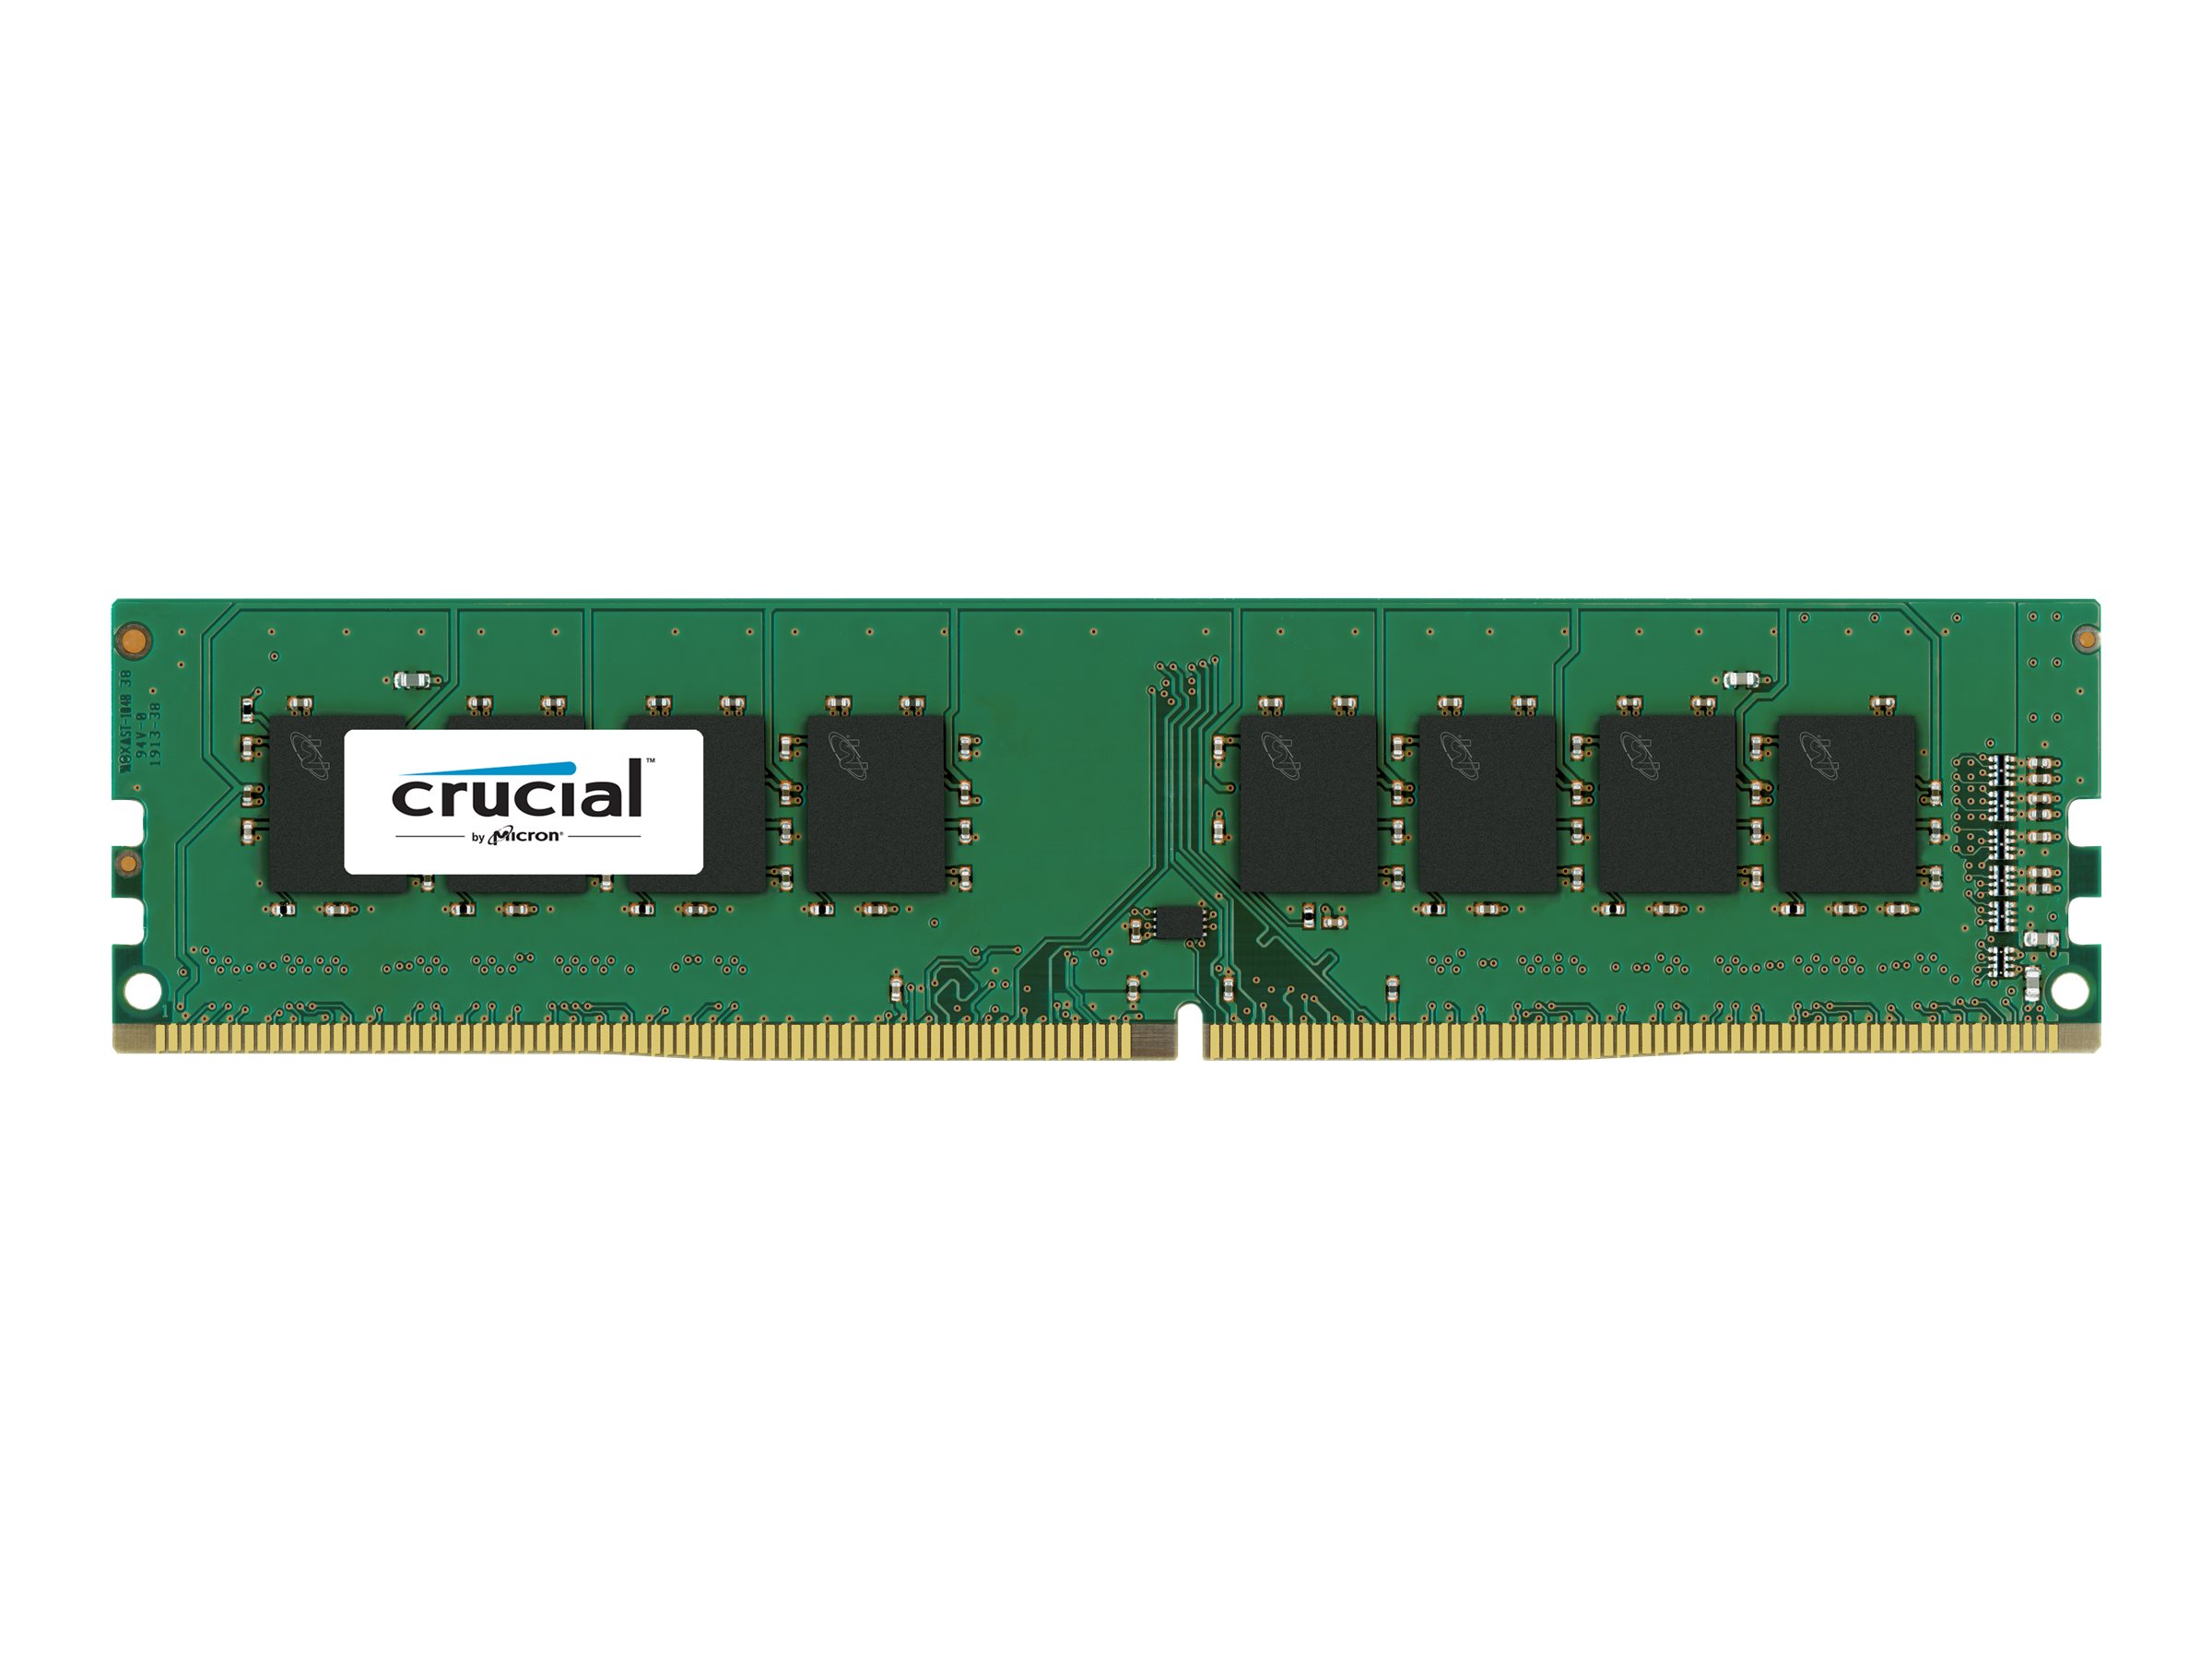 MICRON TECHNOLOGY 4GB DDR4 2400 MT/S (PC4-19200) (CT4G4DFS824A)